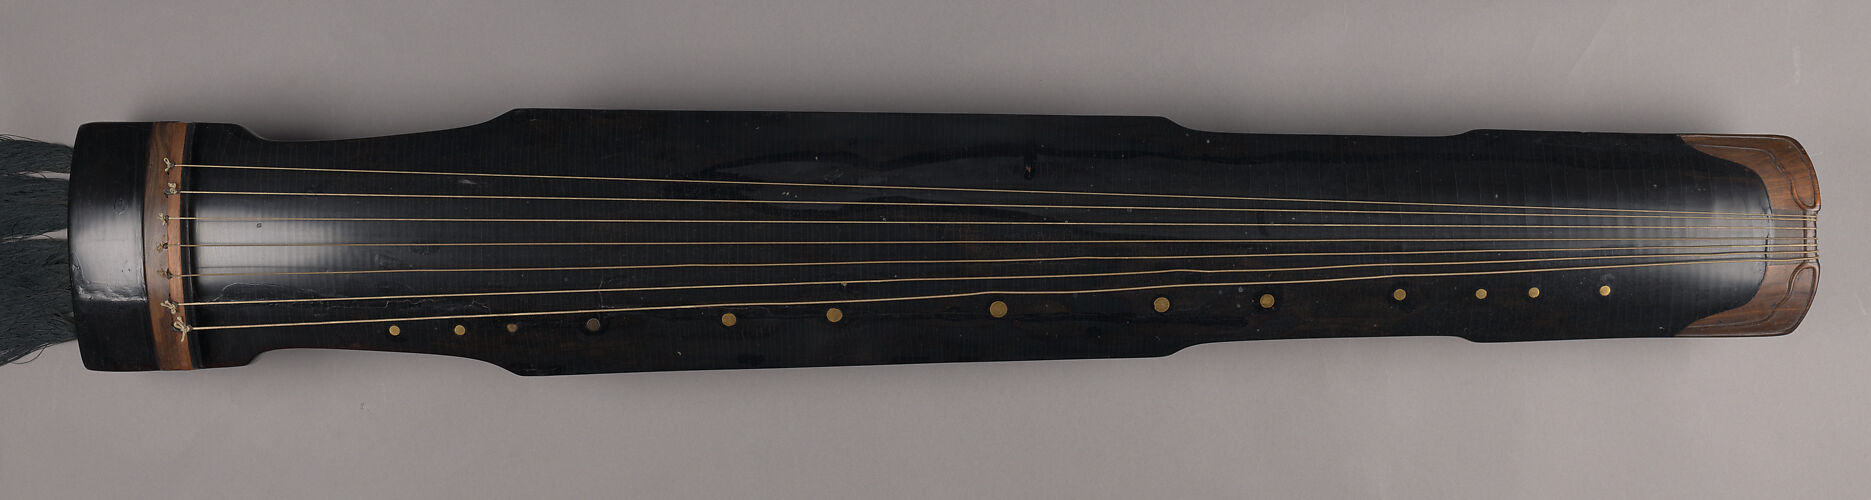 Qin (Seven-stringed zither)